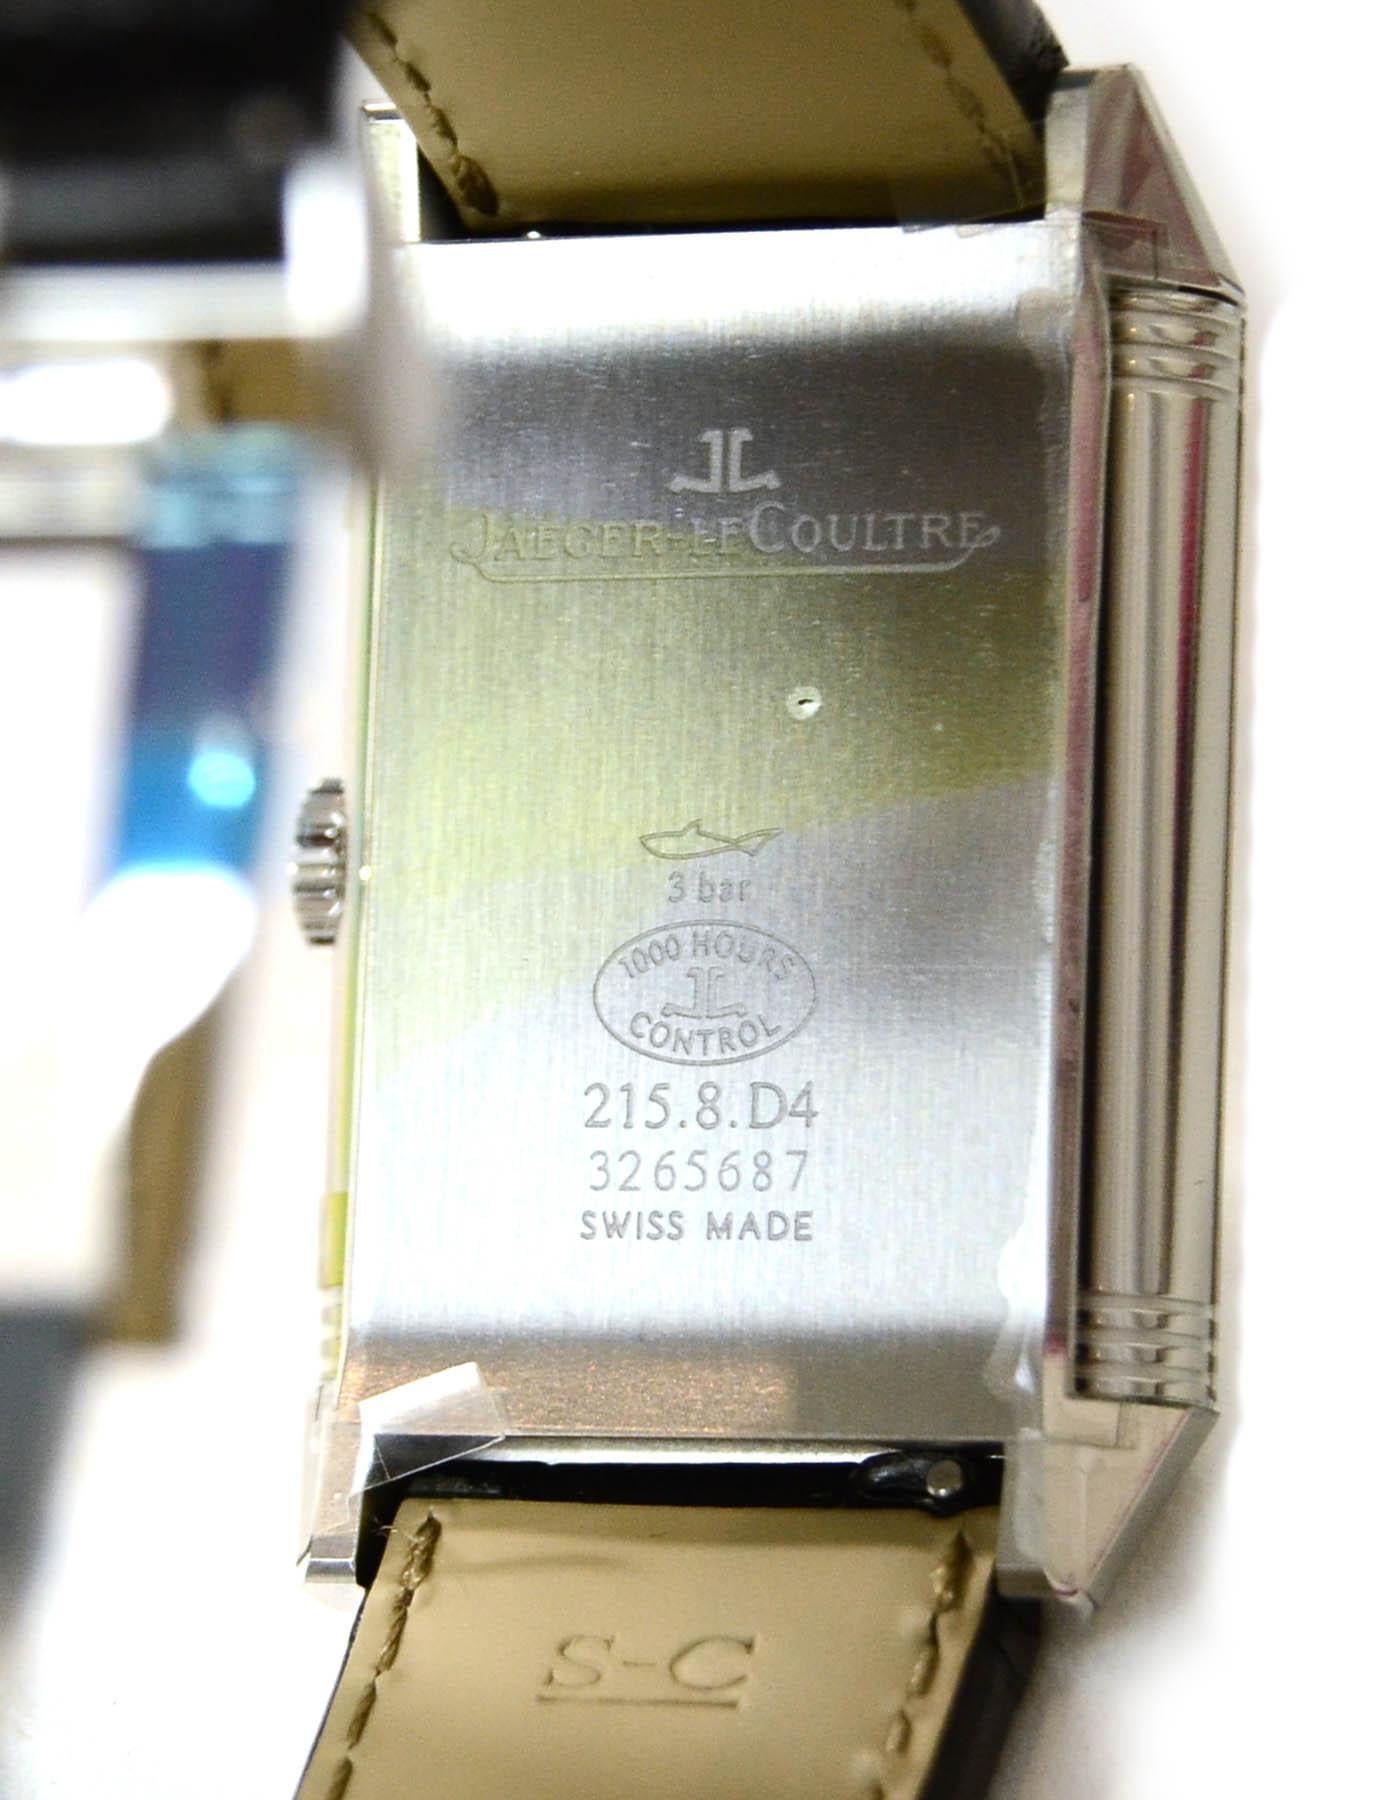 Jaeger-LeCoultre Reverso Classic Large Duoface Hand-Wound 28mm Watch rt. $9, 100 2